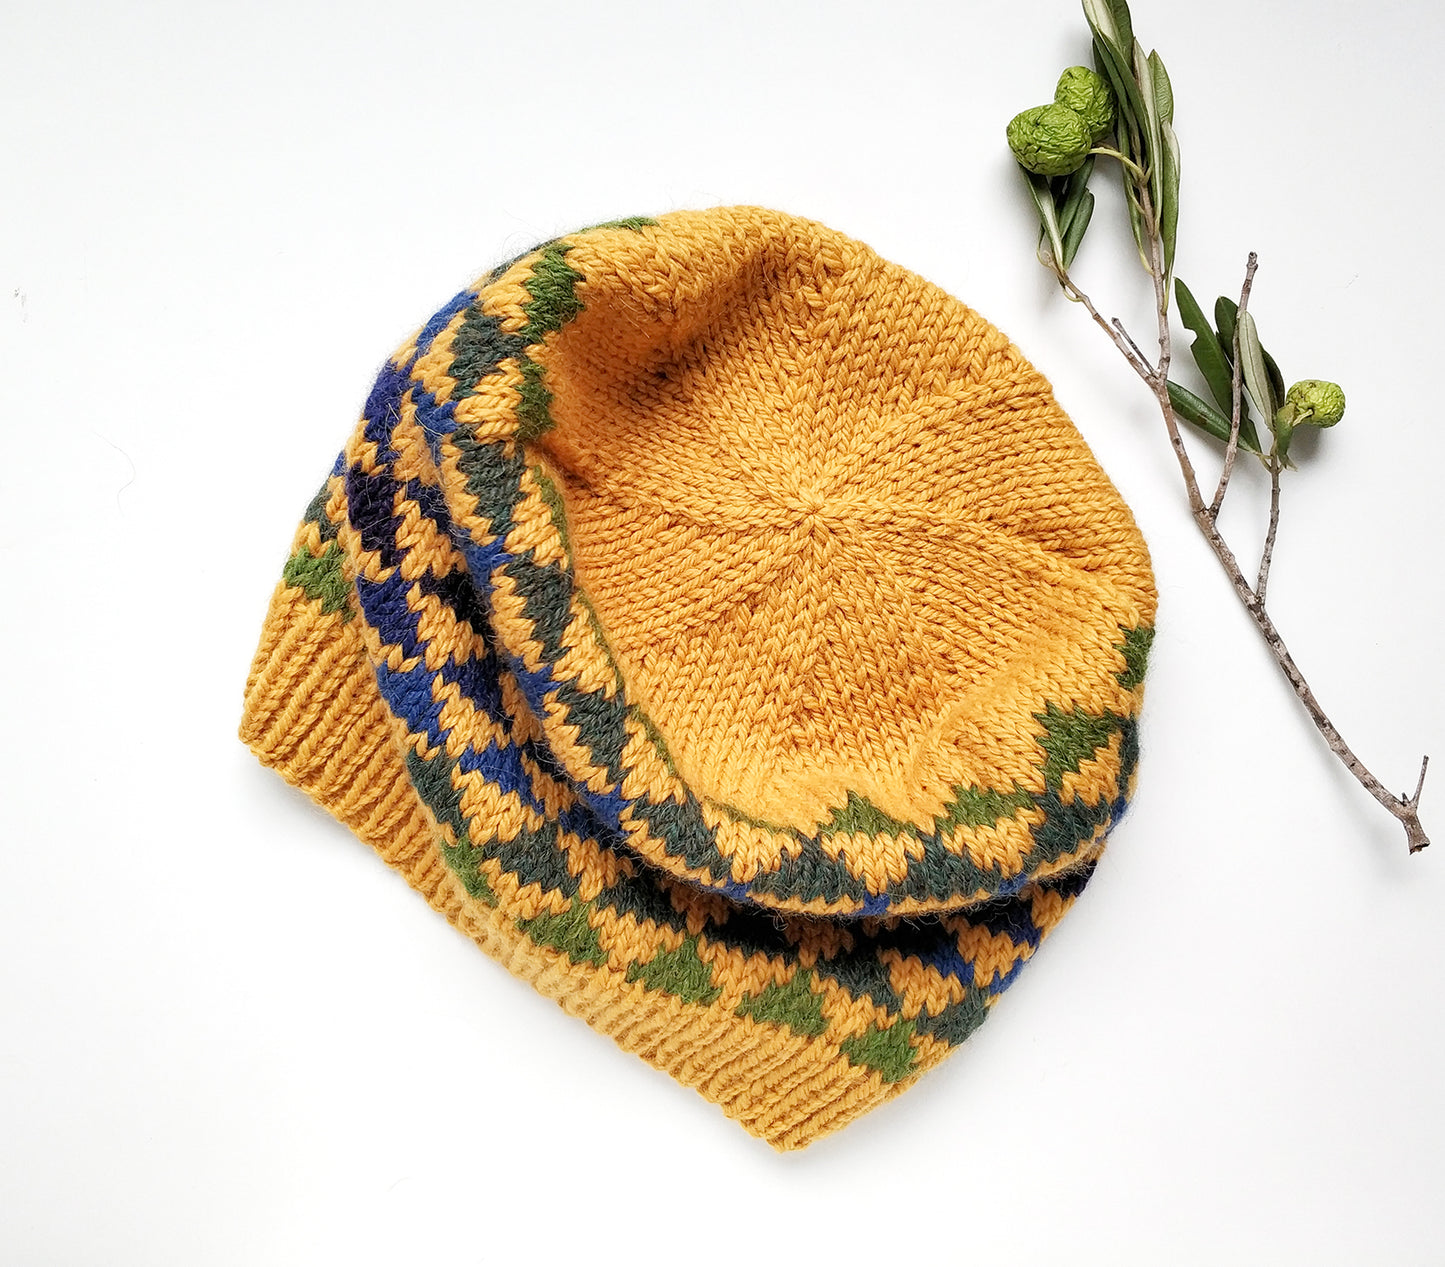 yellow, blue and green wool hand-knitted Fair Isle beanie hat in triangles knitting pattern, top view